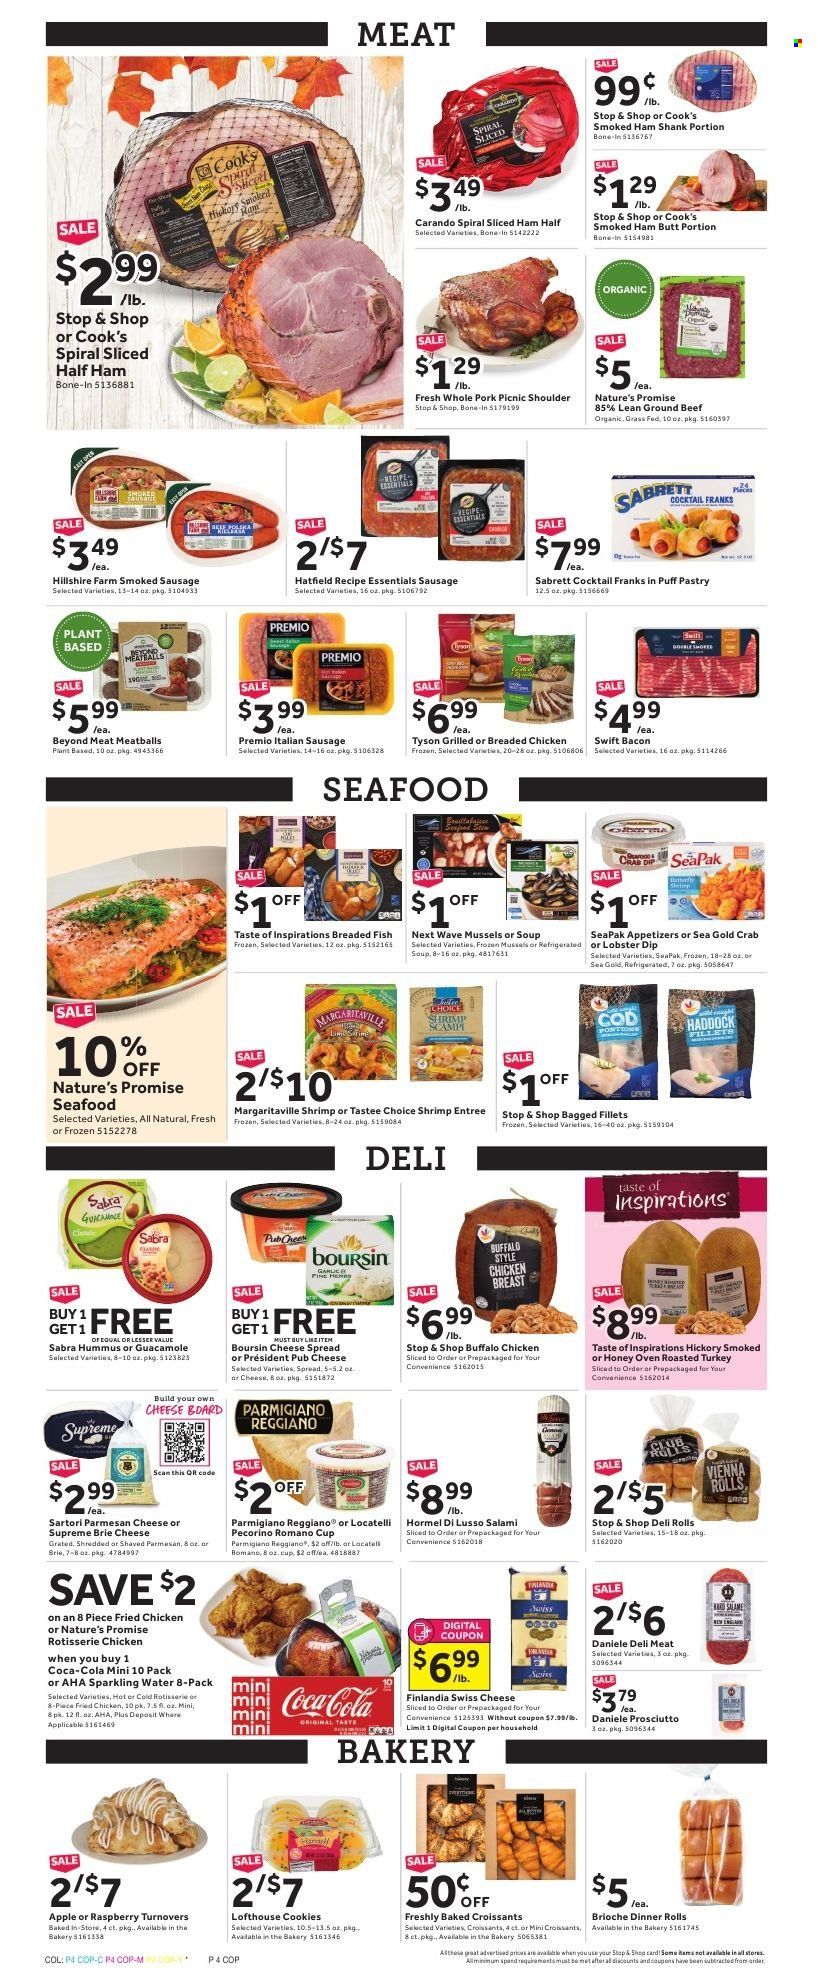 thumbnail - Stop & Shop Flyer - 11/19/2021 - 11/25/2021 - Sales products - dinner rolls, croissant, brioche, Nature’s Promise, turnovers, beef meat, ground beef, cod, lobster, mussels, haddock, seafood, crab, fish, shrimps, chicken roast, meatballs, soup, fried chicken, breaded fish, Hormel, bacon, salami, half ham, ham, ham shank, Hillshire Farm, prosciutto, smoked ham, Cook's, sausage, smoked sausage, italian sausage, hummus, cheese spread, guacamole, swiss cheese, parmesan, Pecorino, pub cheese, brie, Parmigiano Reggiano, Président, parmigiana, cookies, Coca-Cola, sparkling water, WAVE. Page 4.